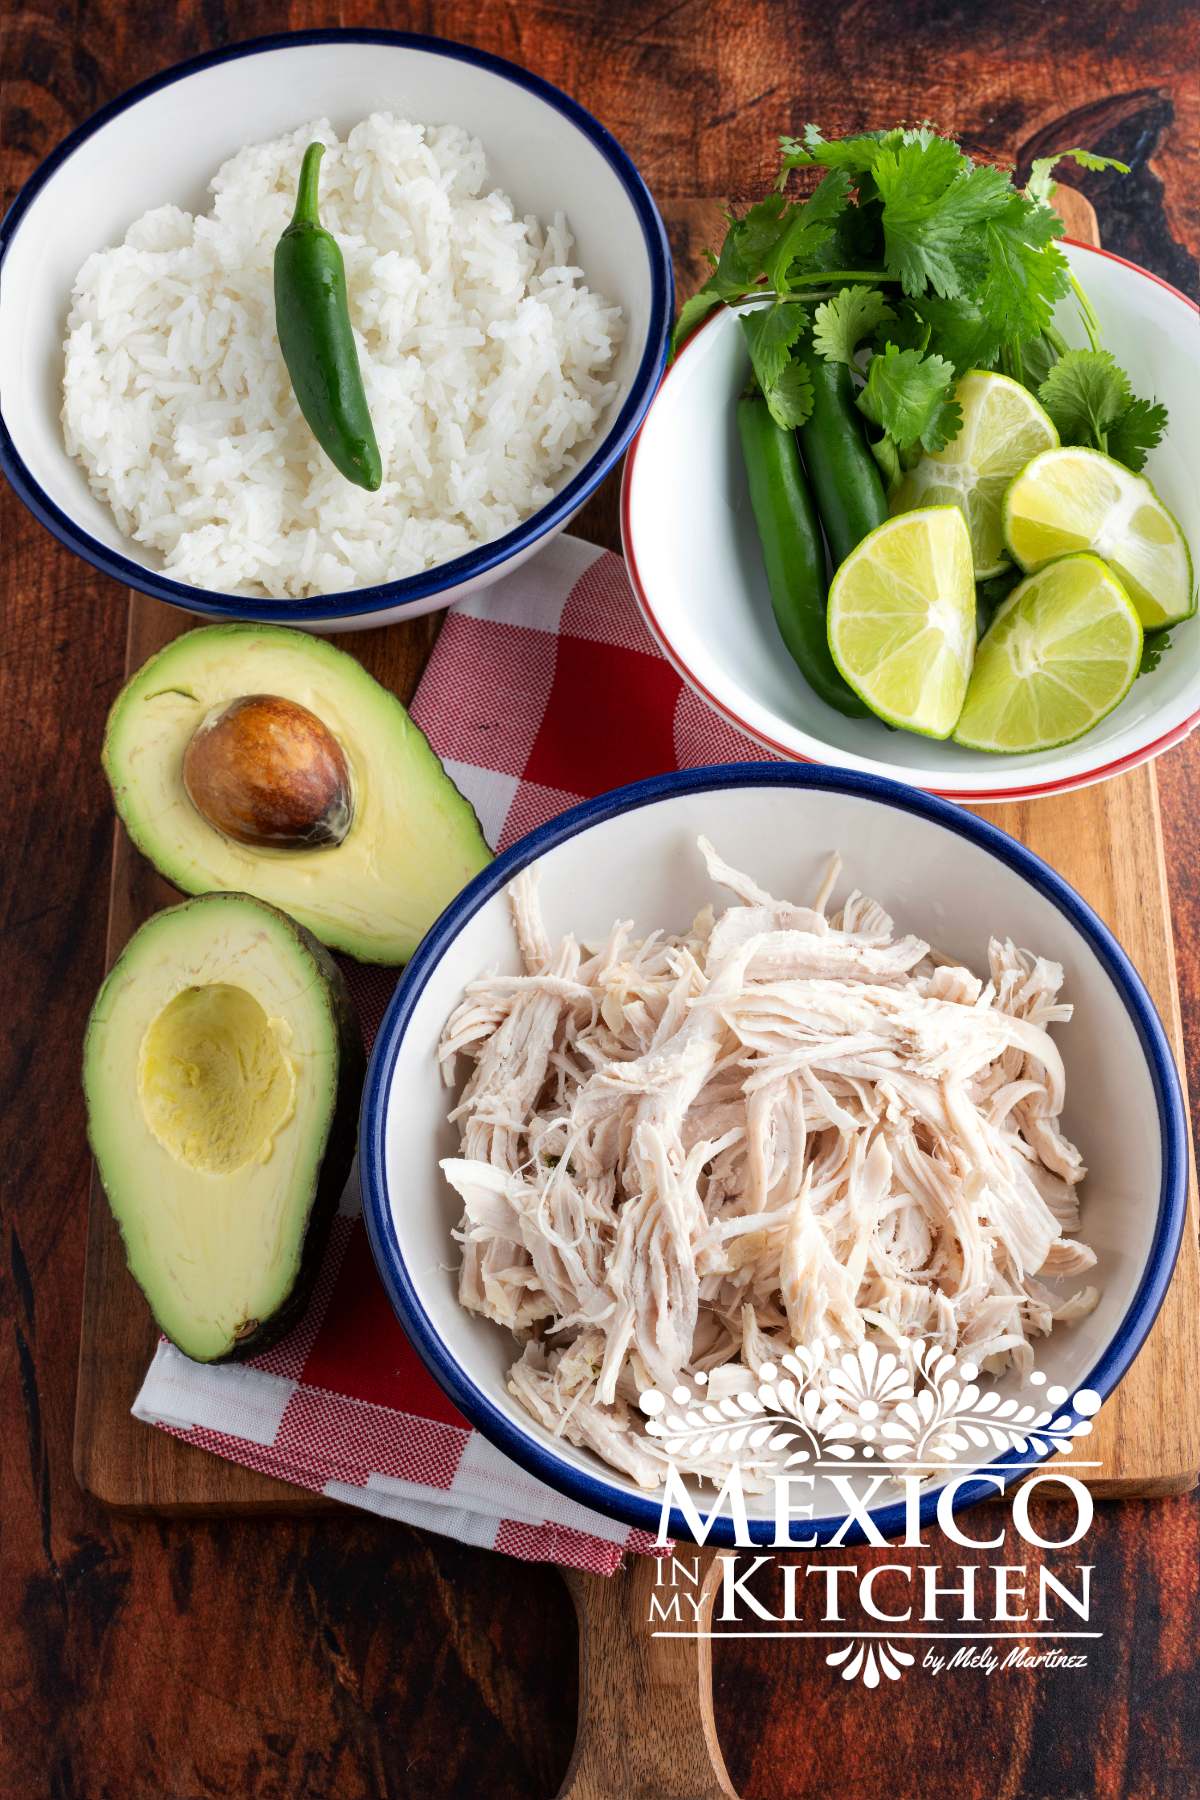 Shredded chicken served in a white bowl, next to another bowl with avocado, cilantro and limes, rices, and white rice.